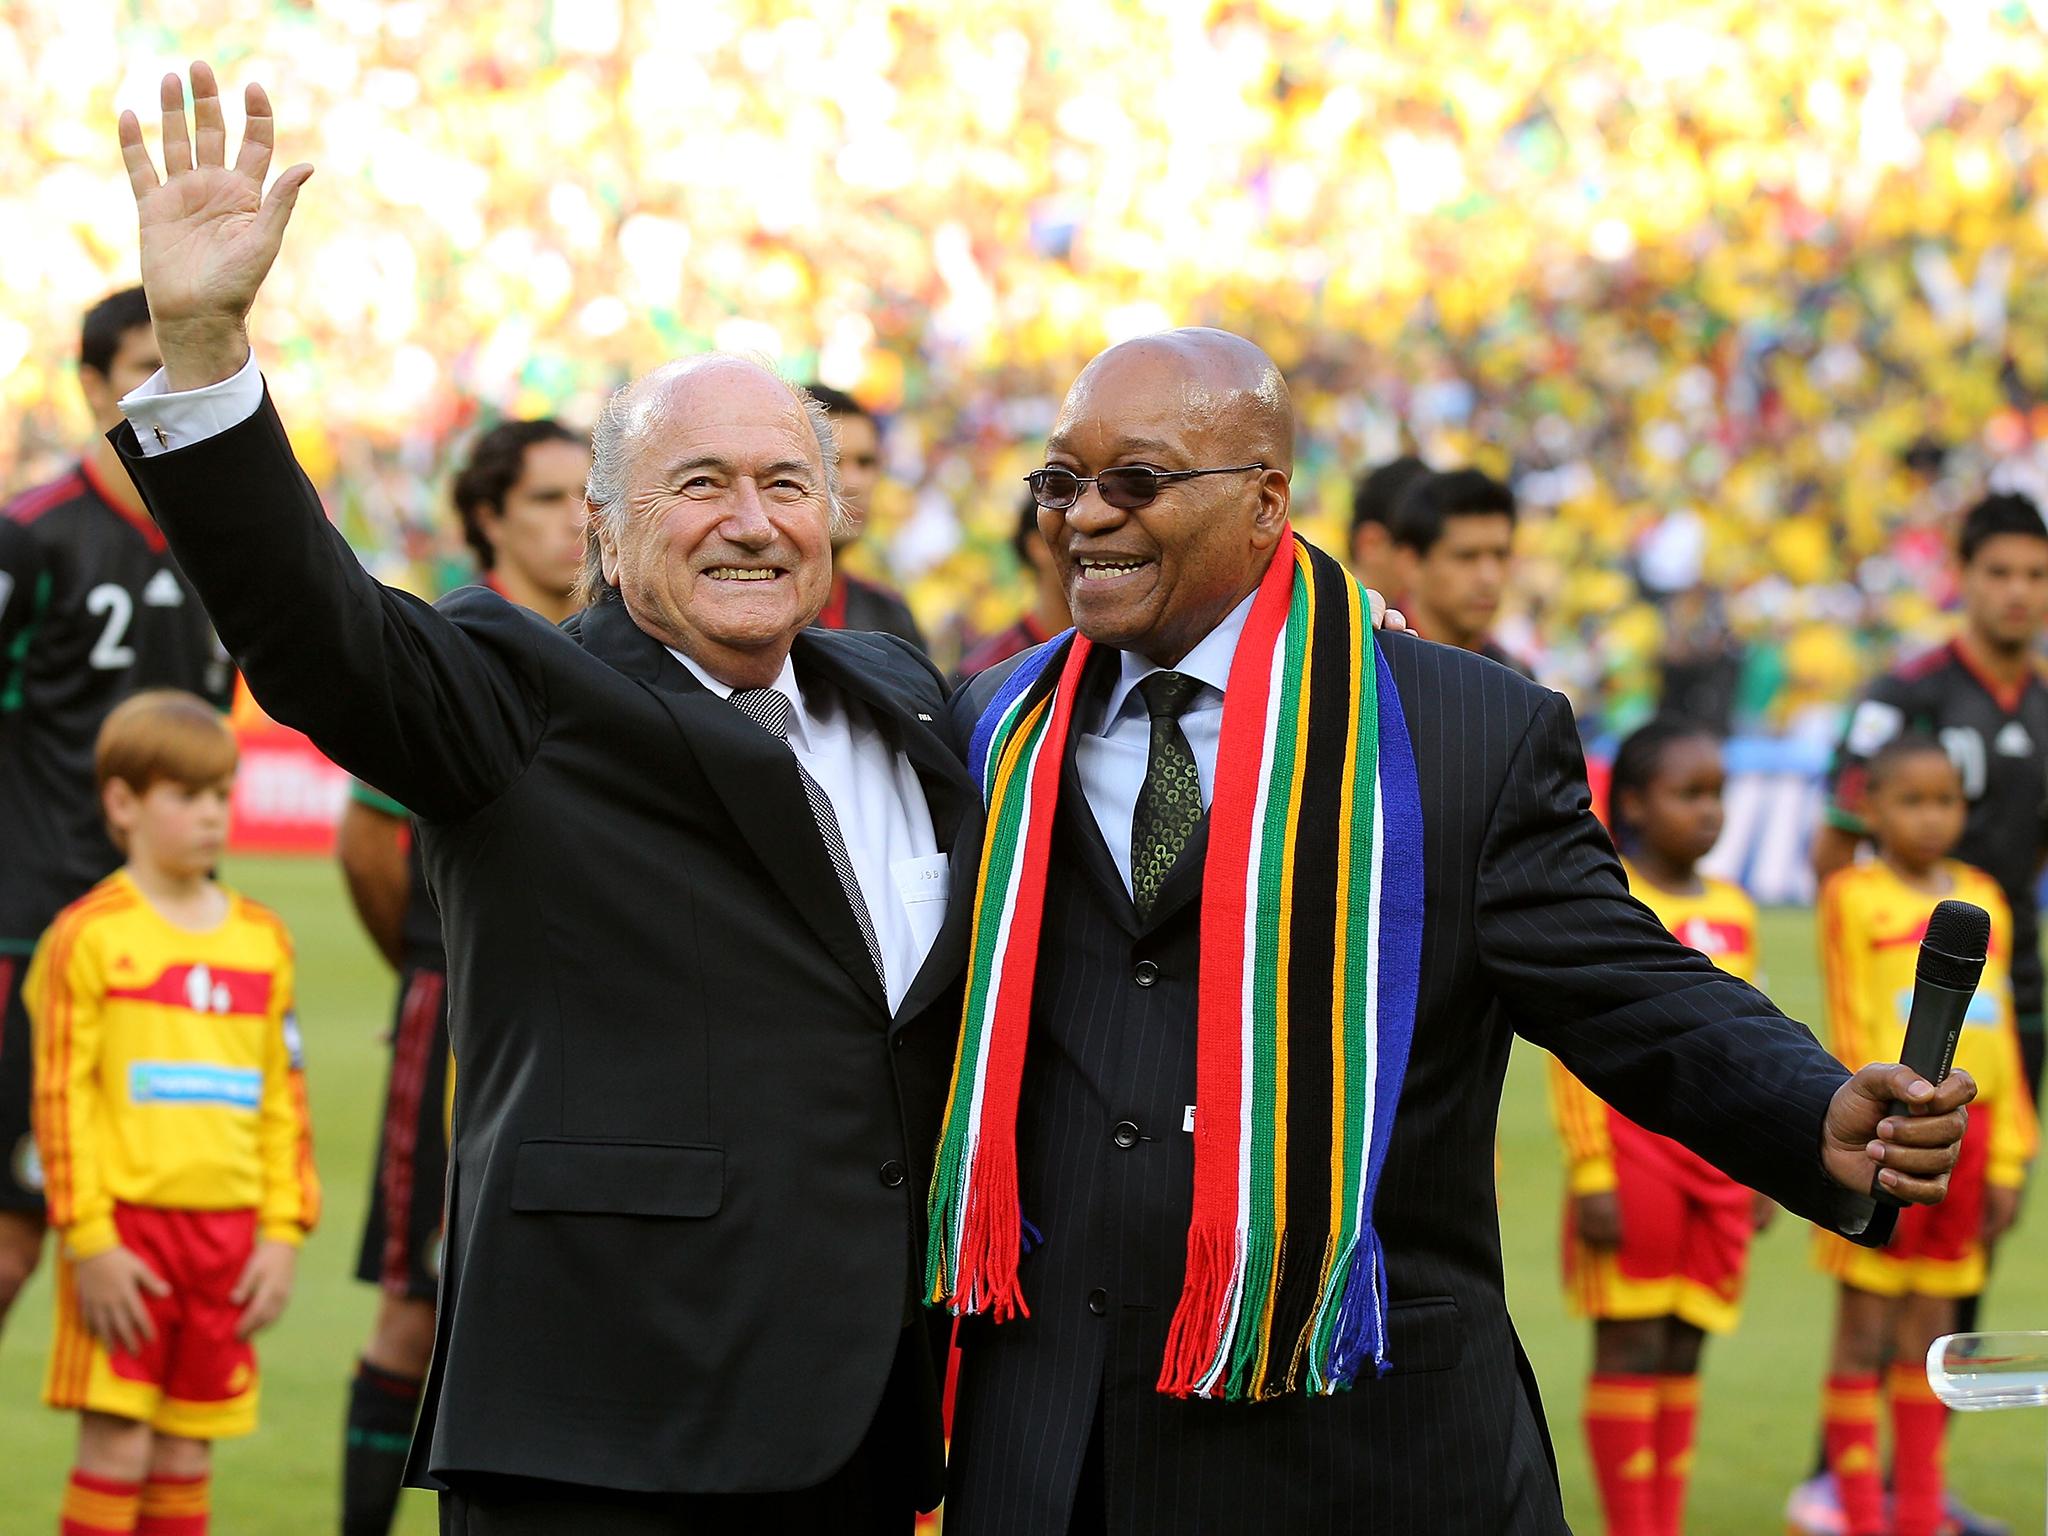 Zuma with the disgraced former Fifa president Sepp Blatter at the 2010 World Cup